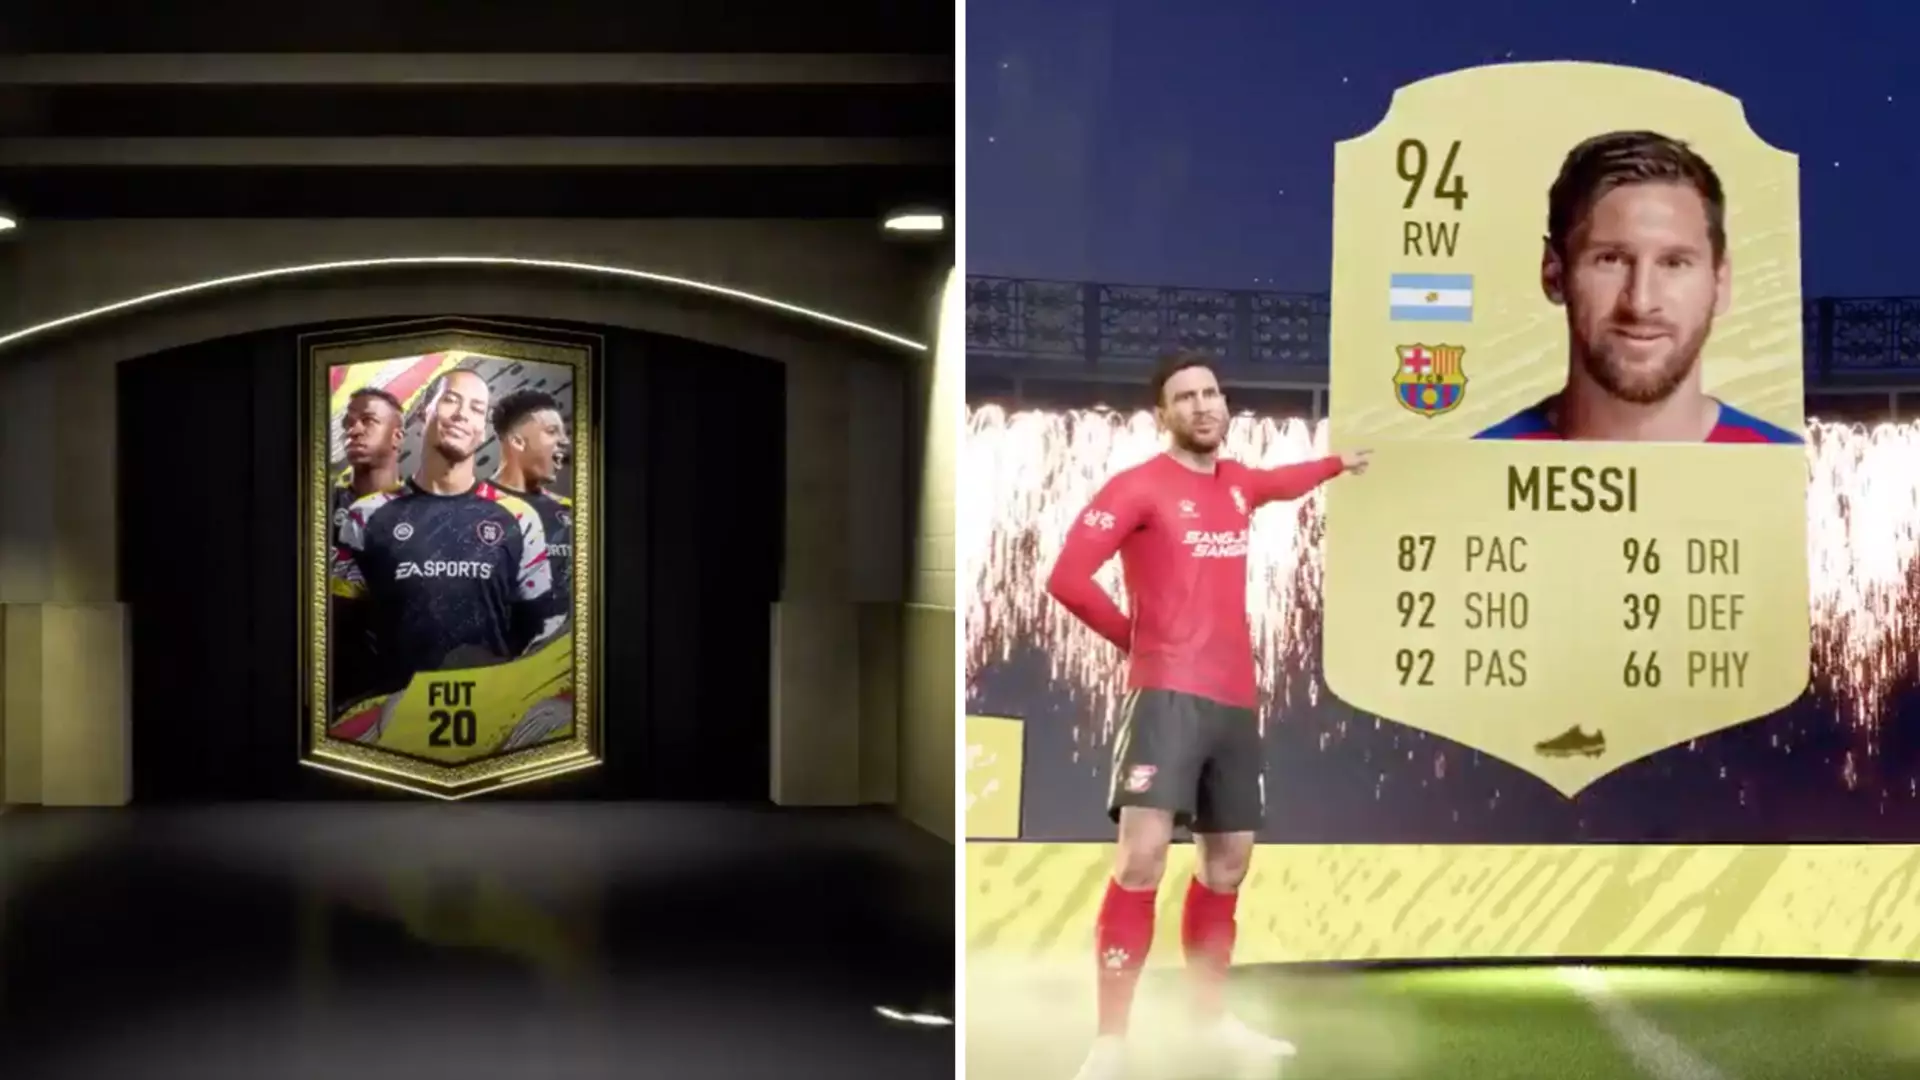 Lionel Messi Has Already Been Pulled From A FIFA 20 Ultimate Team Pack